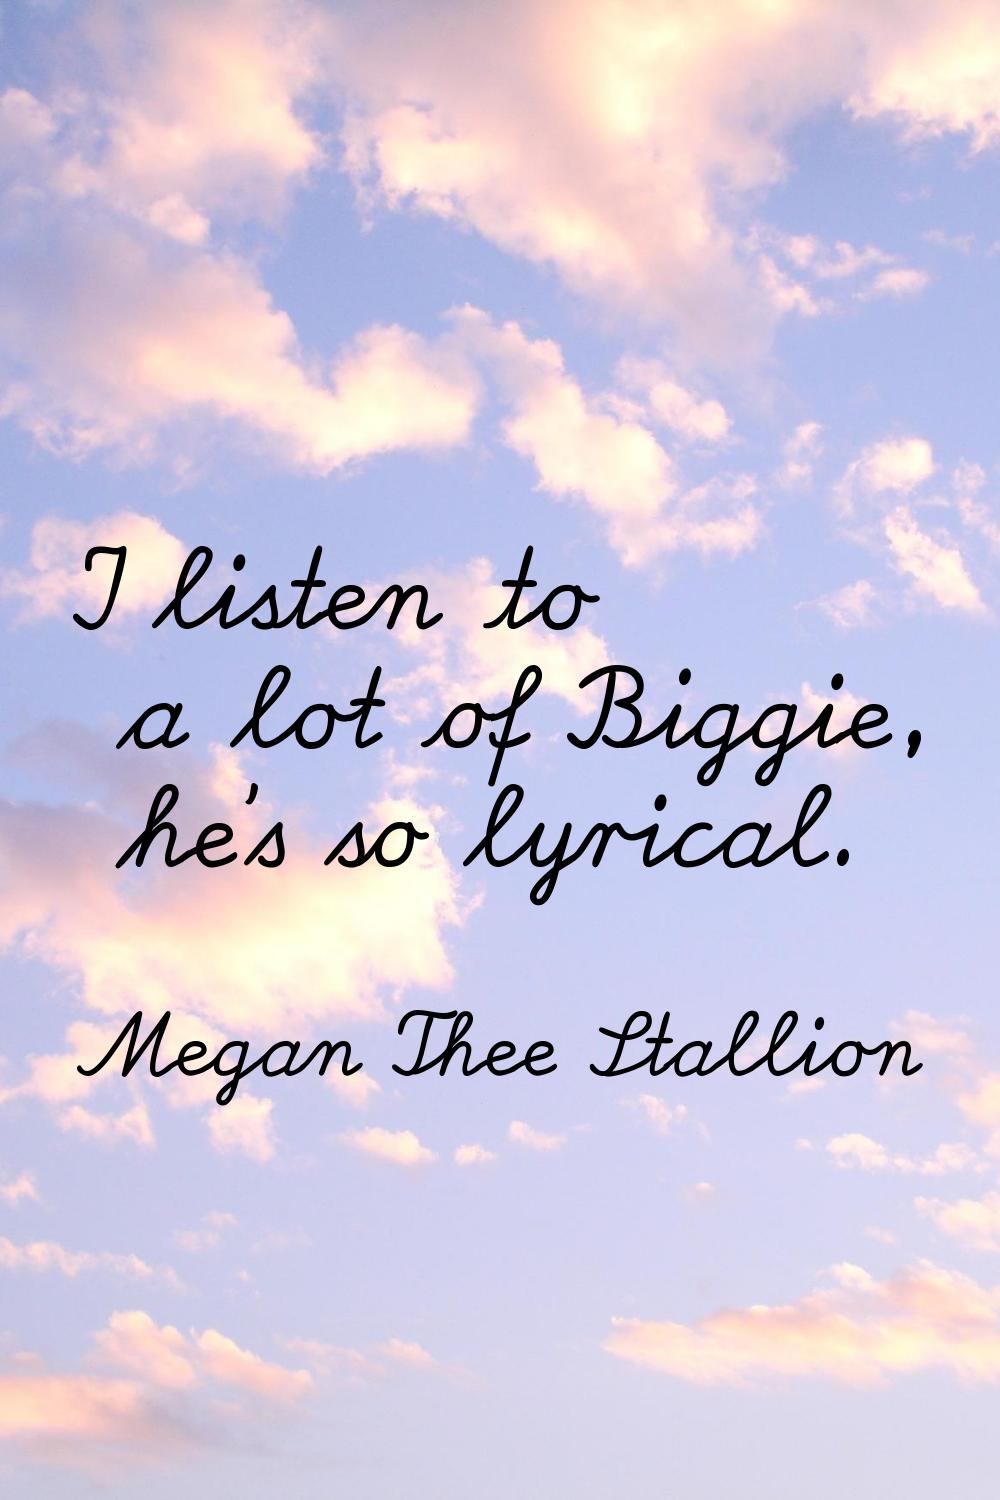 I listen to a lot of Biggie, he's so lyrical.